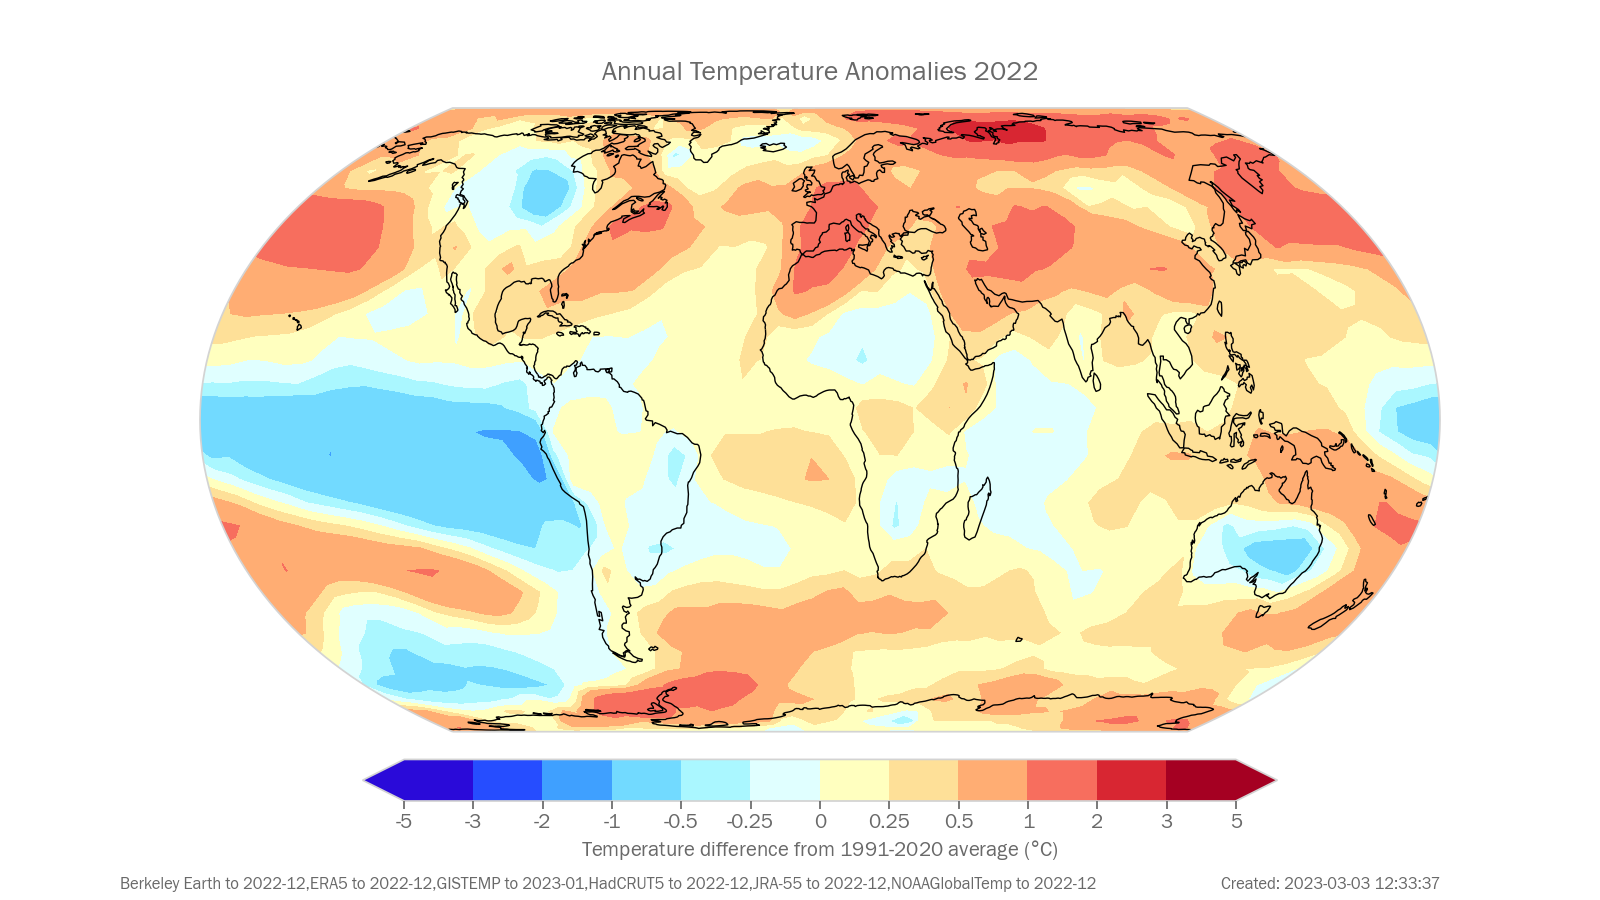 Annual Near surface temperature anomaly (°C, difference from the 1991-2020 average)  for 2022. Data shown are the median of the following six data sets: Berkeley Earth, ERA5, GISTEMP, HadCRUT5, JRA-55, NOAAGlobalTemp.